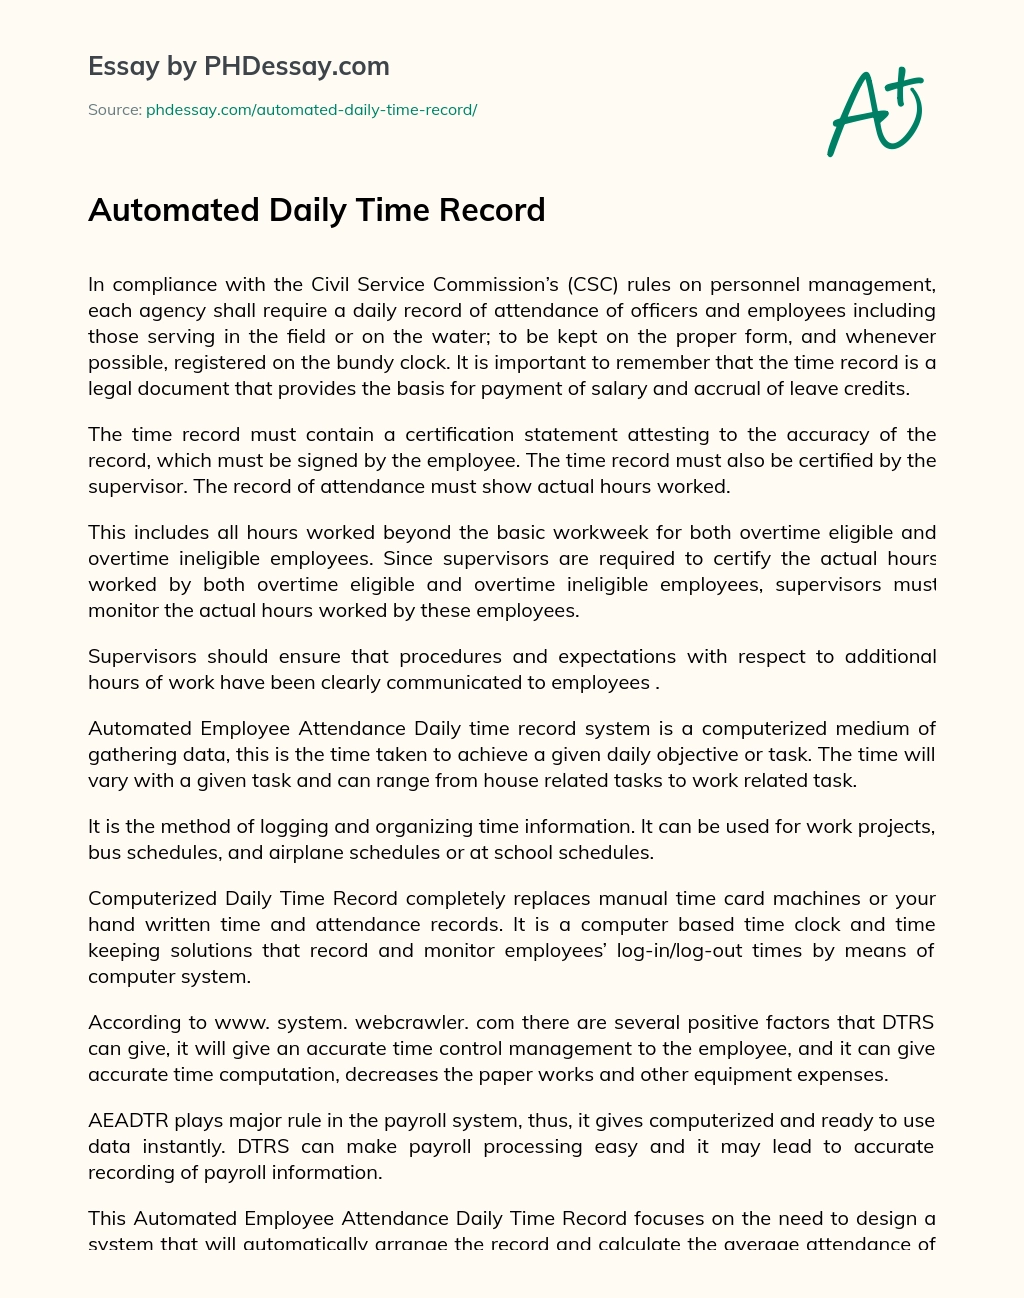 Automated Daily Time Record essay